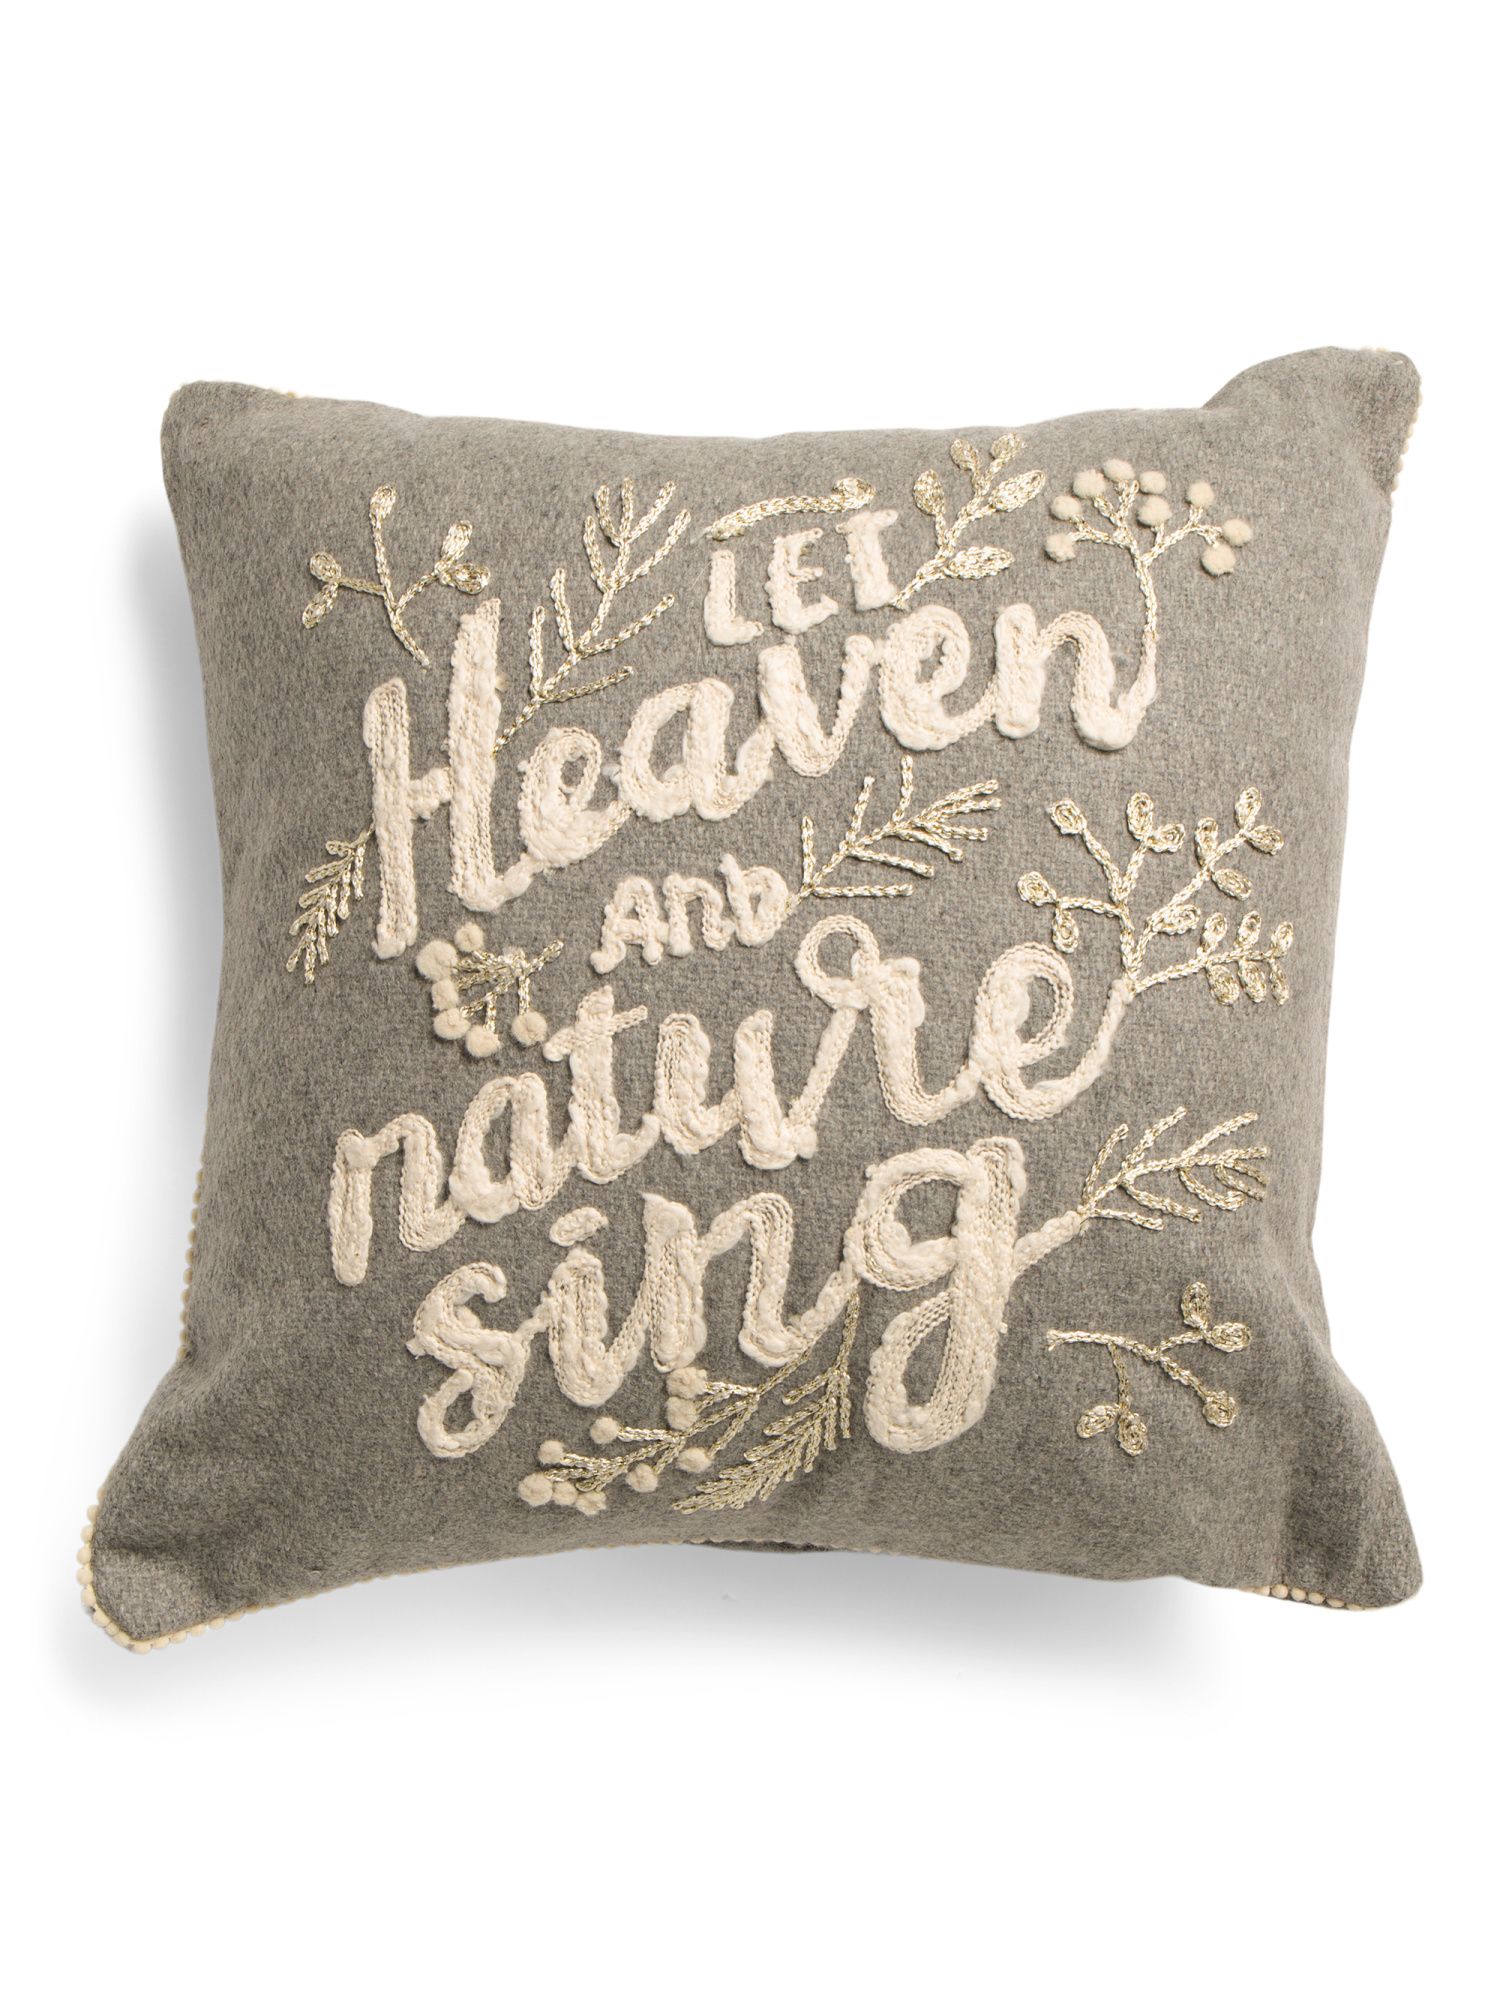 18x18 Wool Let Heaven And Nature Sing Pillow | TJ Maxx